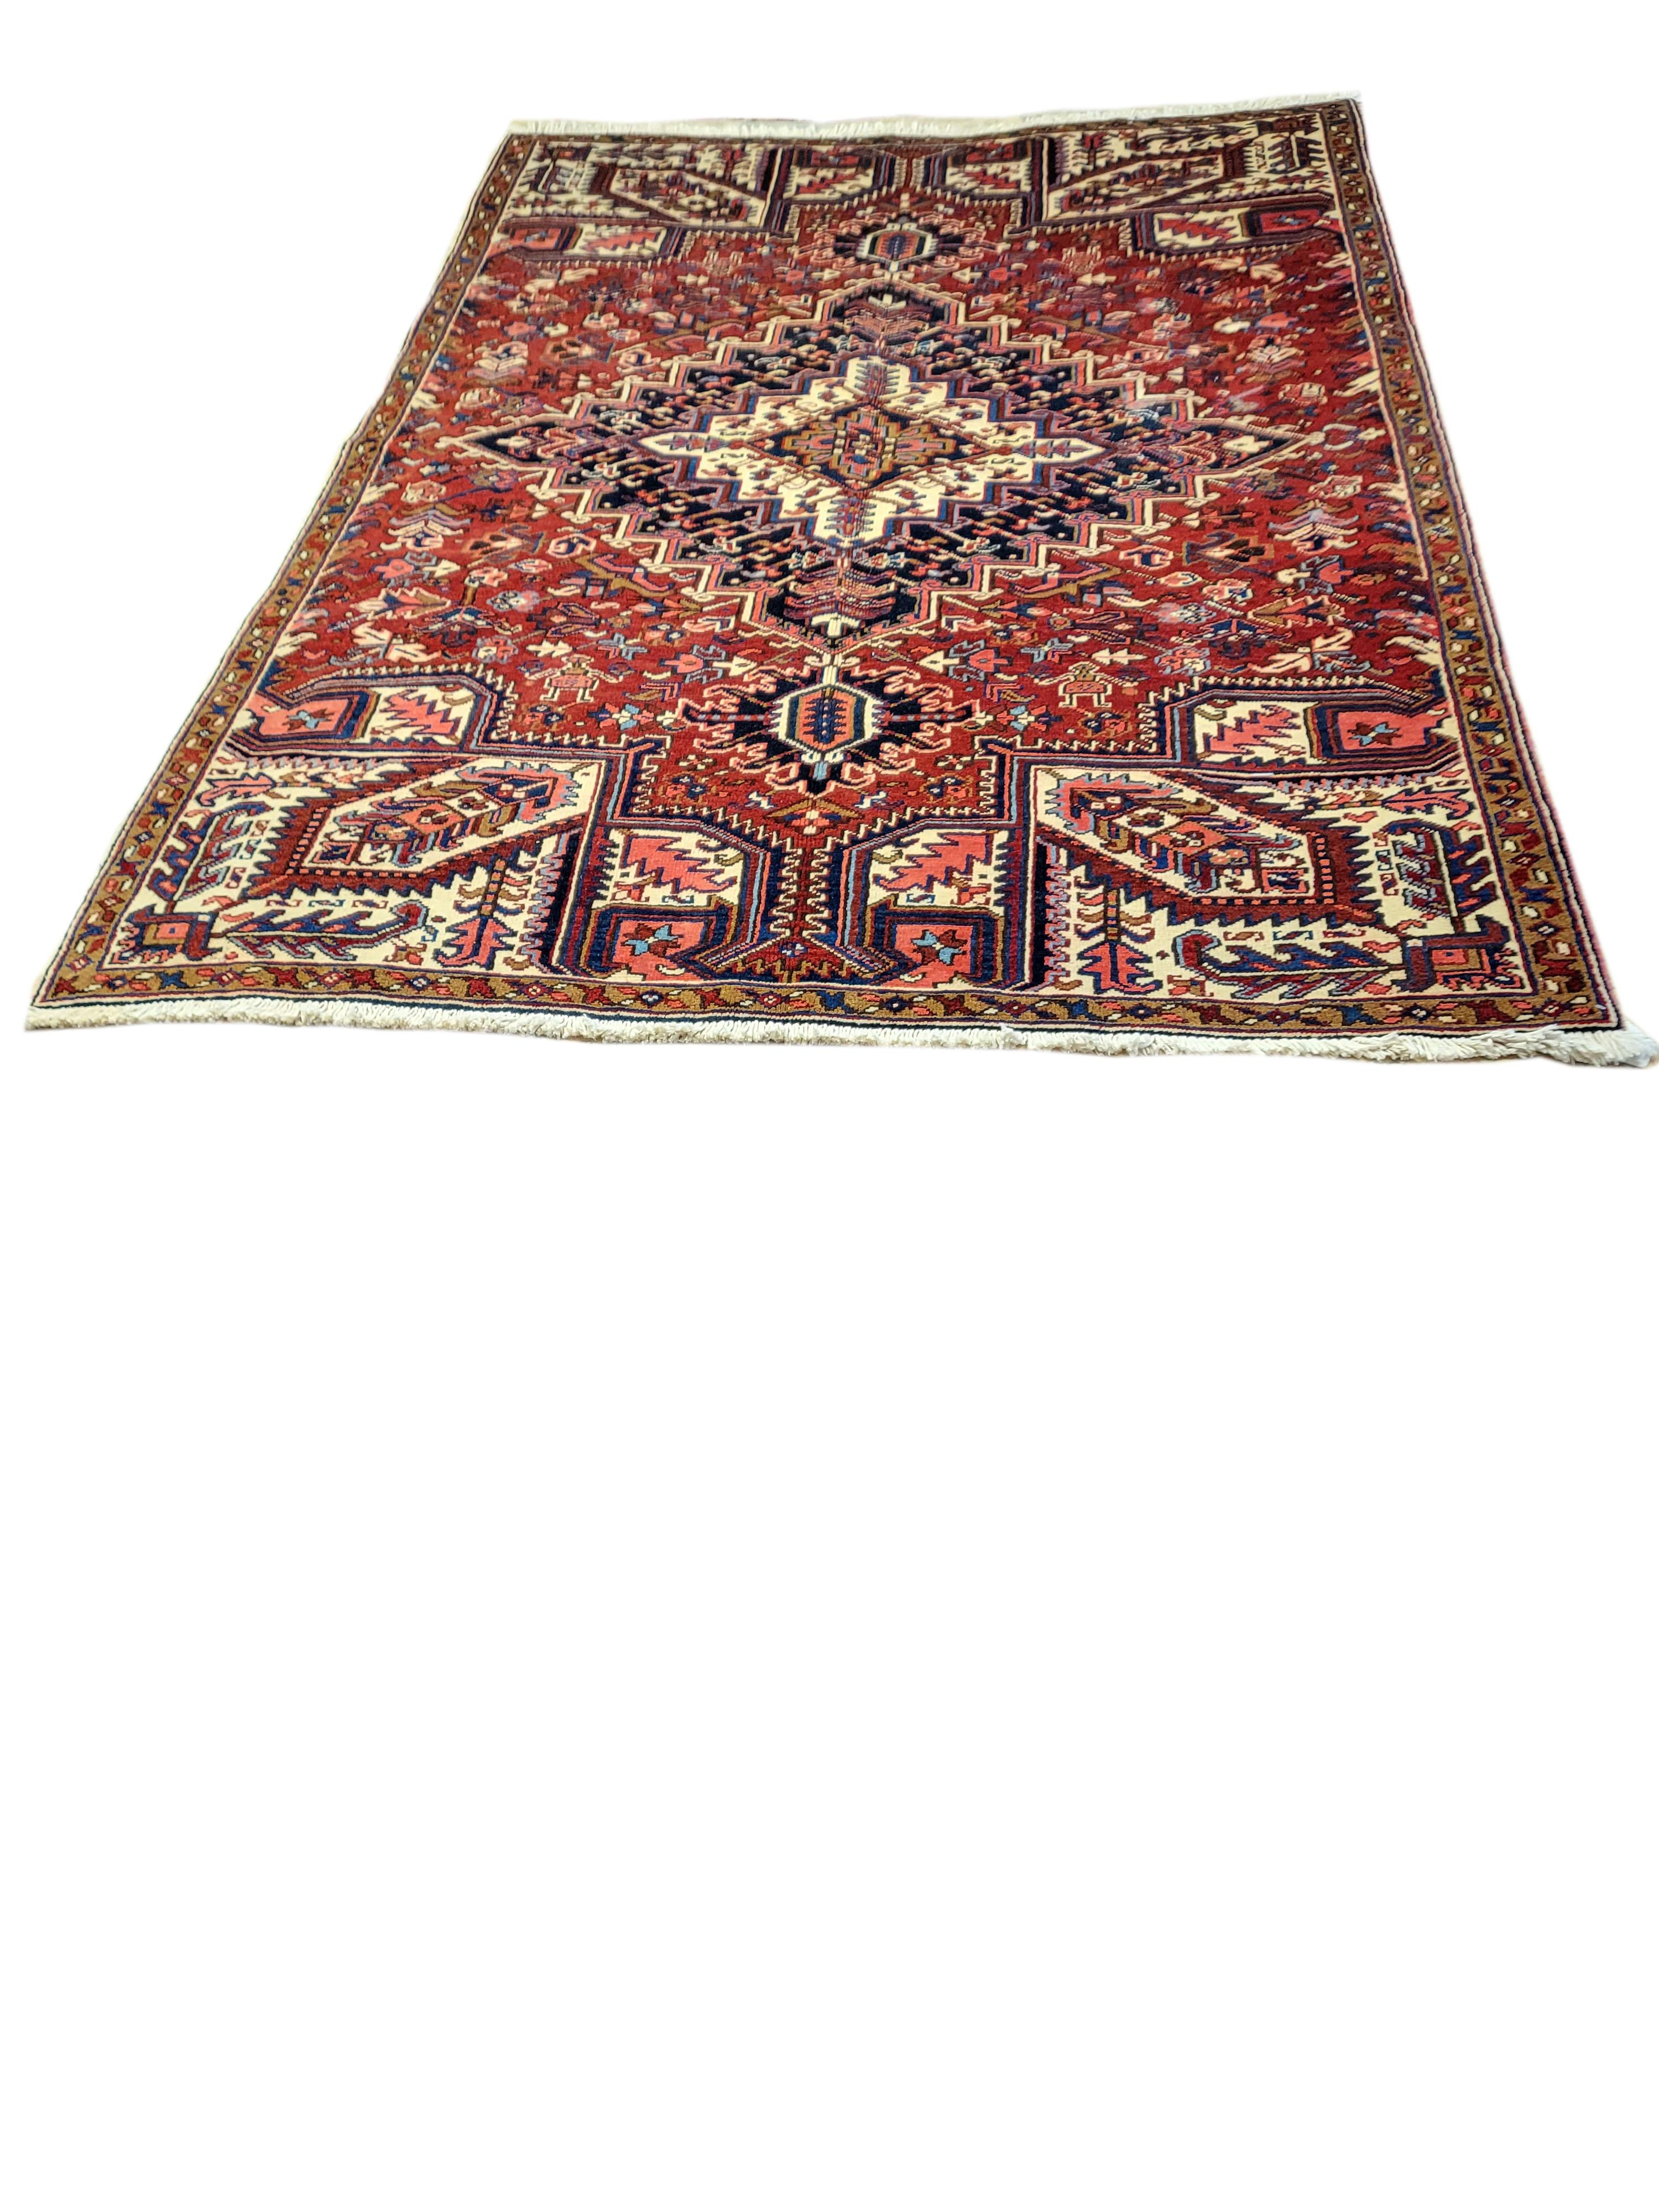 This jaw dropping, elaborate Heriz is a classic example of the bold Heriz design. With its luxuriously thick pile and expert craftsmanship, this near 80 year old rug will surely outlast us all! A one of a kind, authentic piece like this is